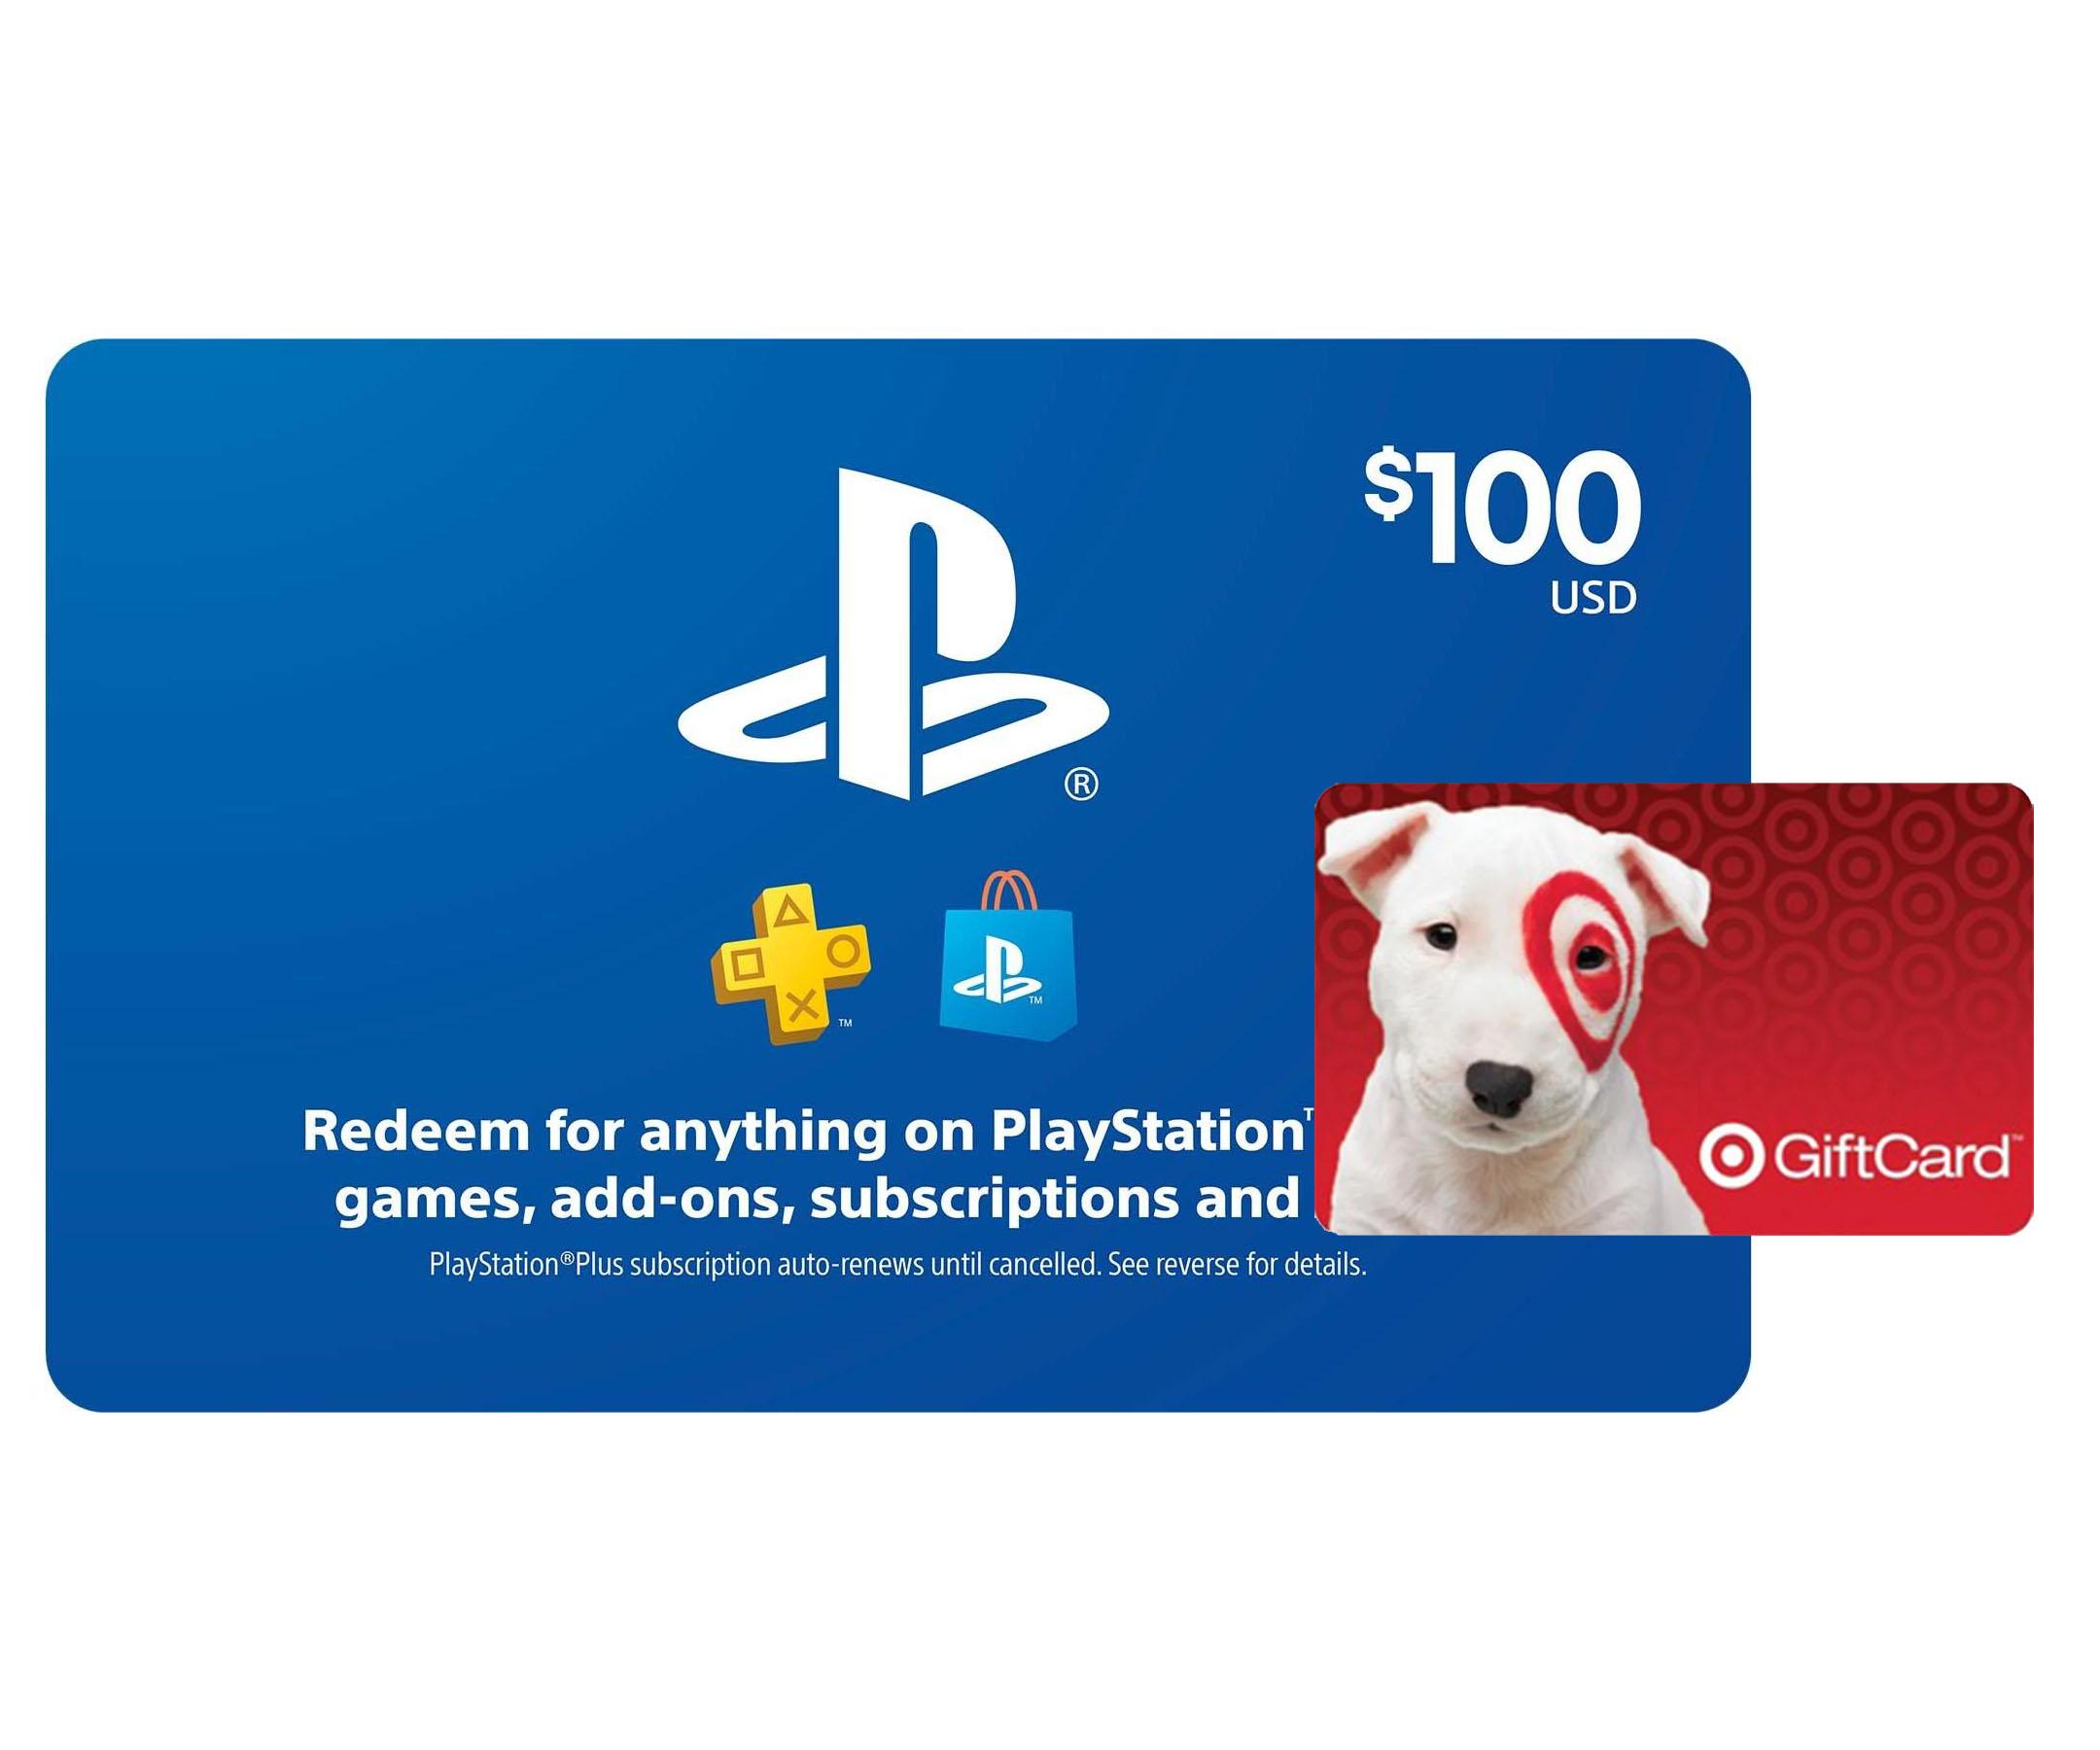 Buy a $100 Playstation Store Gift Card and Get $10 Target GC for Free